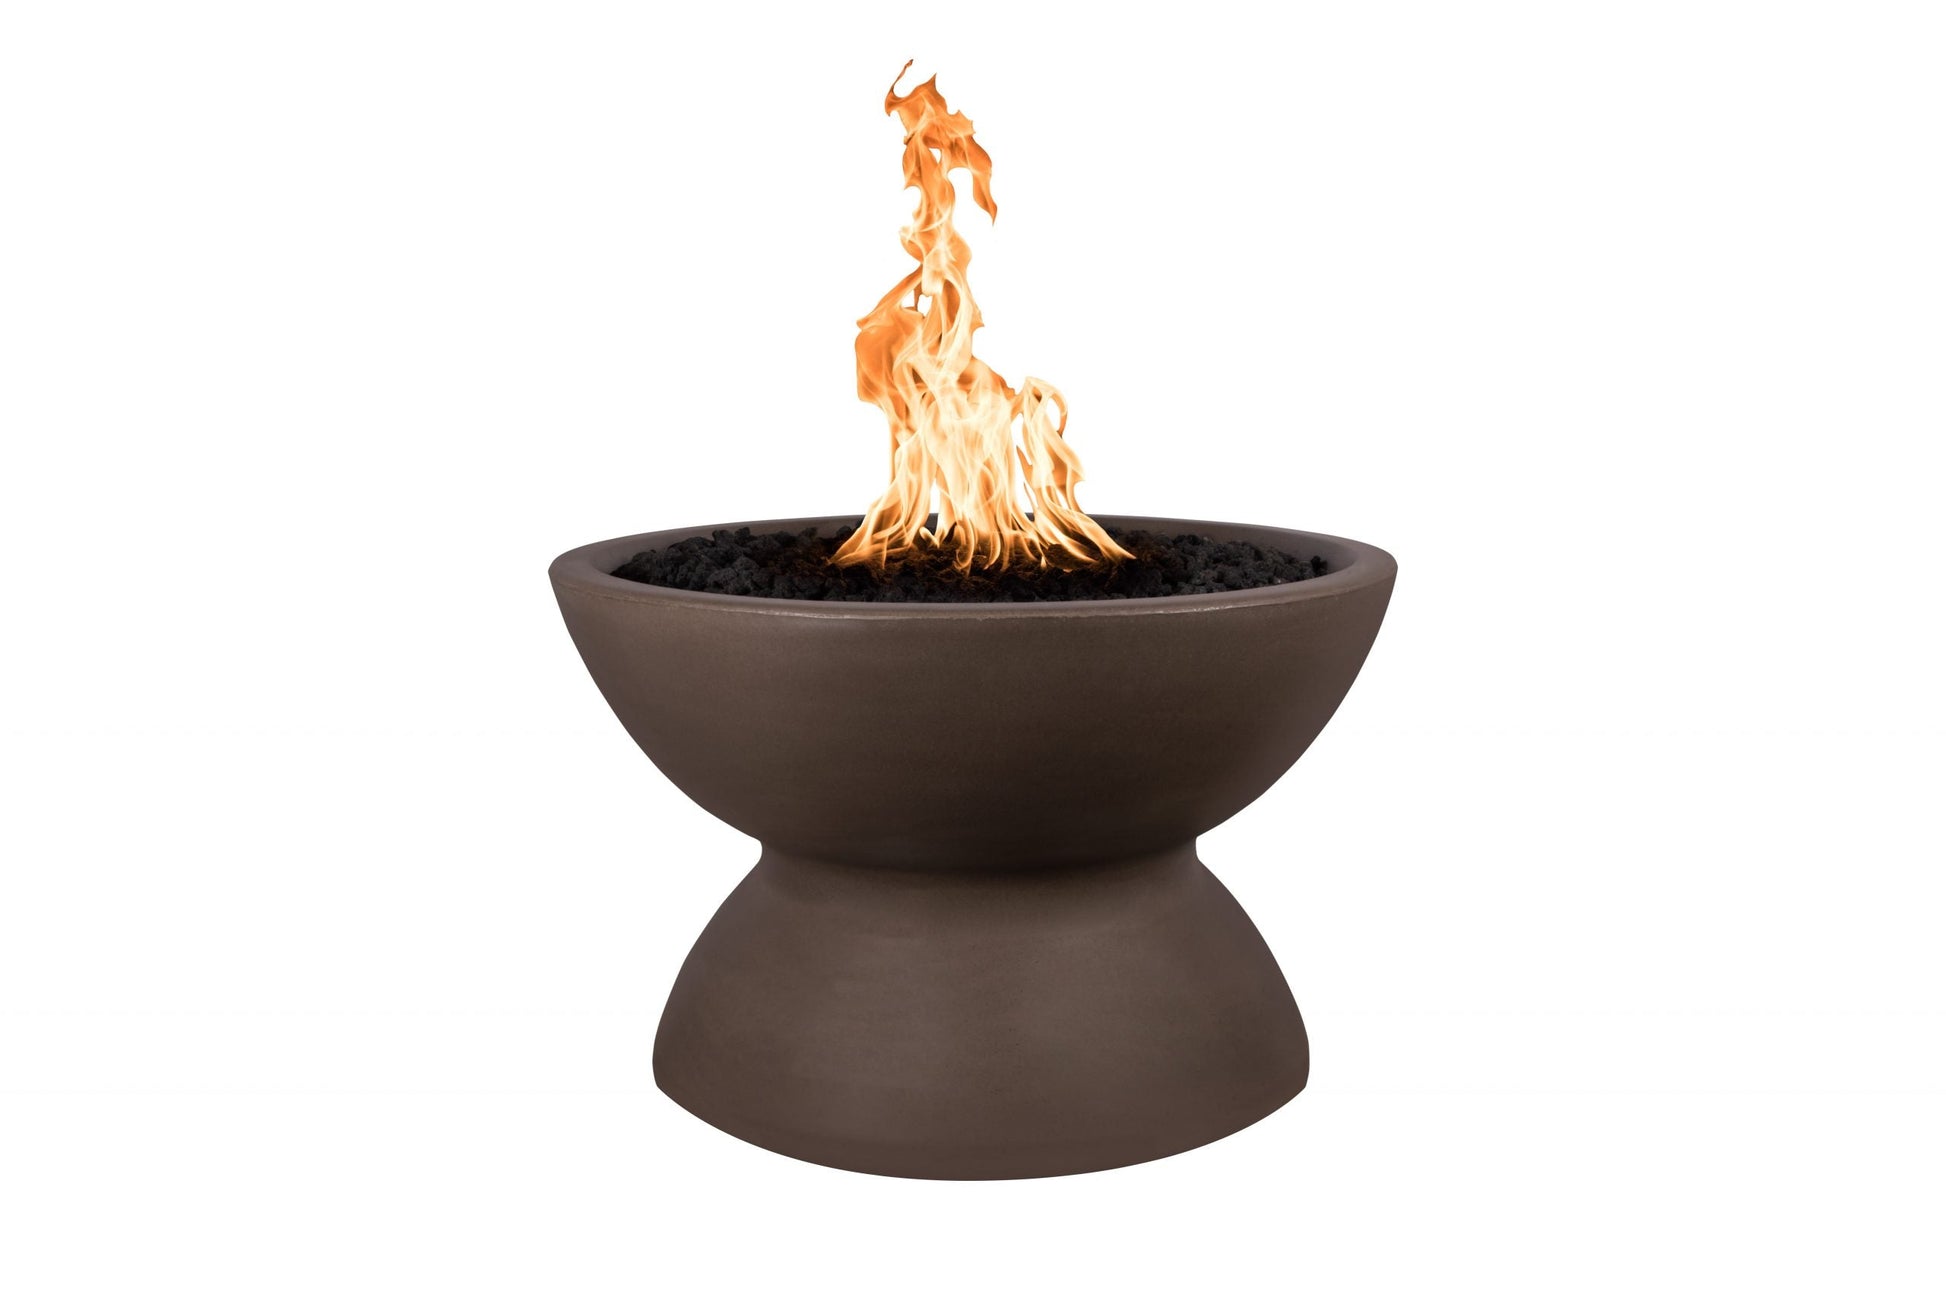 The Outdoor Plus Round Copa 33" Rustic Moss Stone GFRC Concrete Natural Gas Fire Pit with Match Lit Ignition